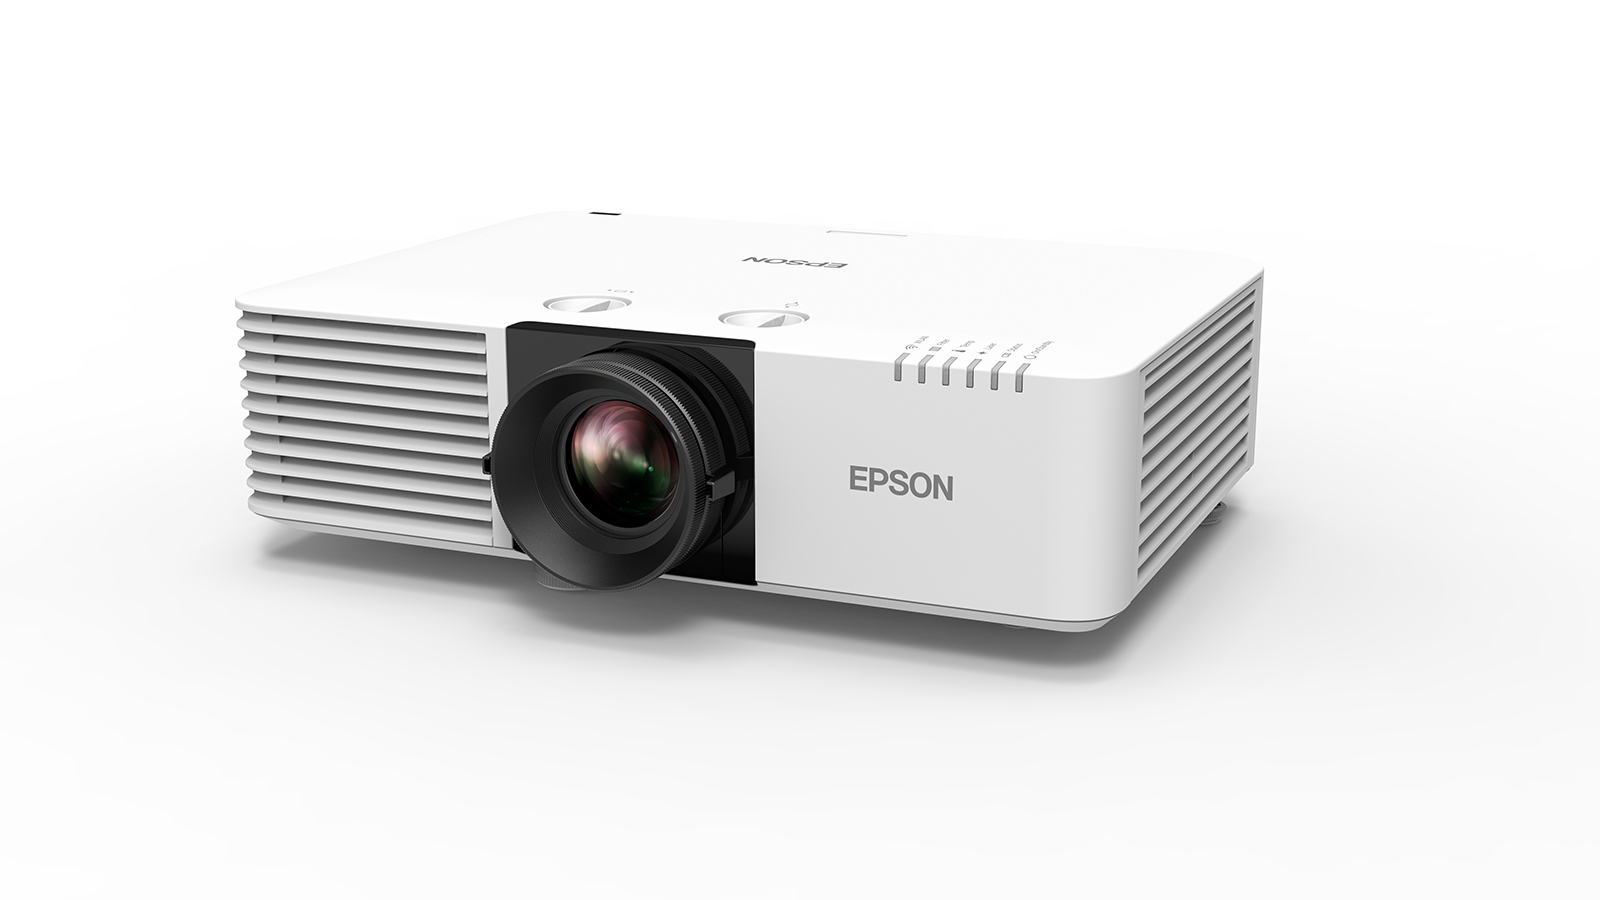 Epson Launches EB-L770U and EB-L570U Projectors with 4K Enhancement Resolution